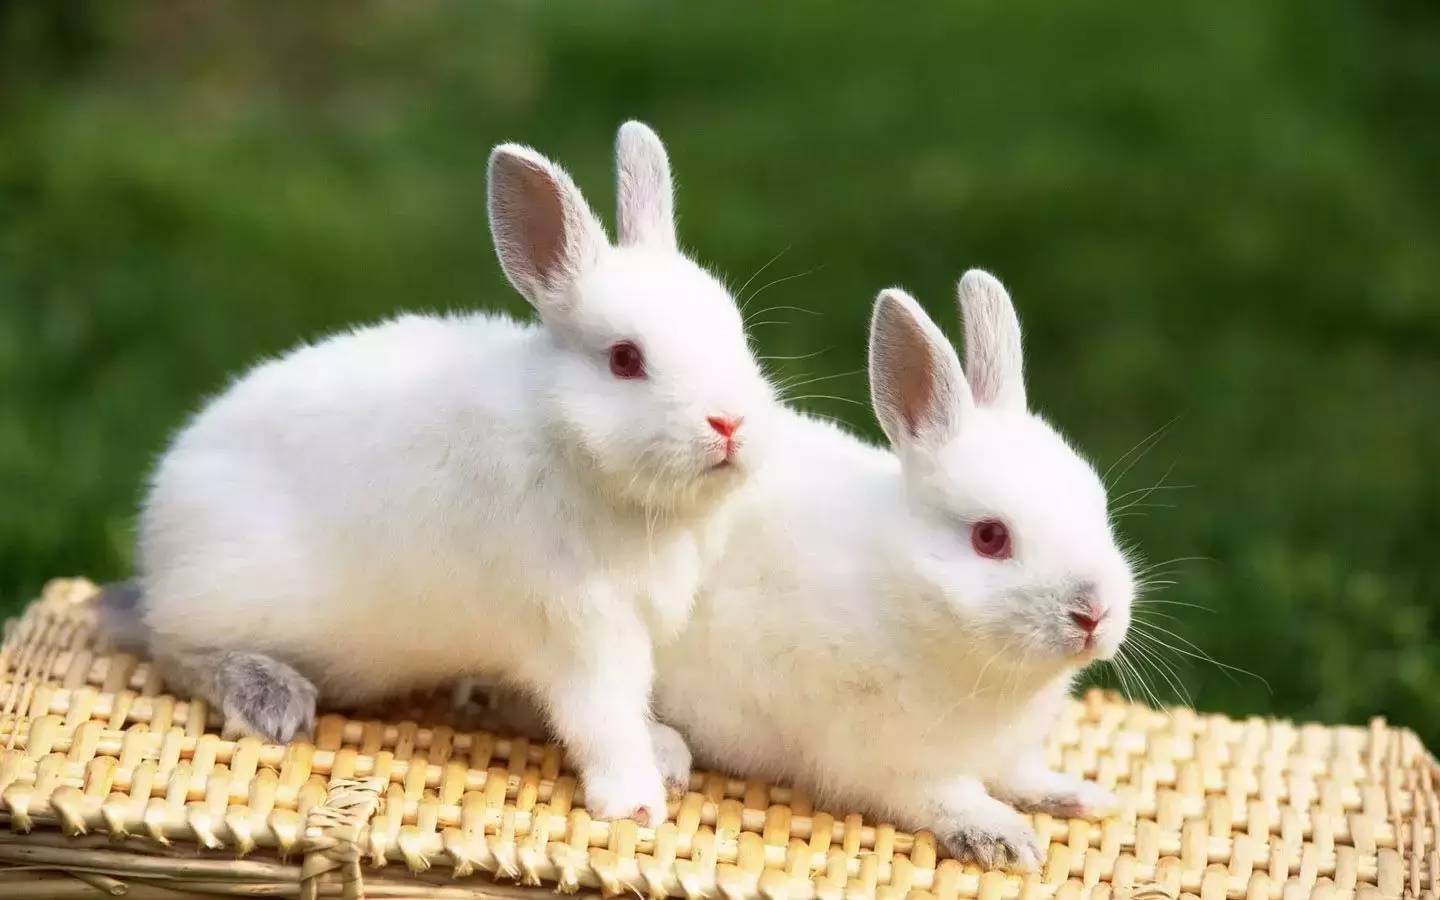 Bean knowledge: people used rabbits to test pregnancy